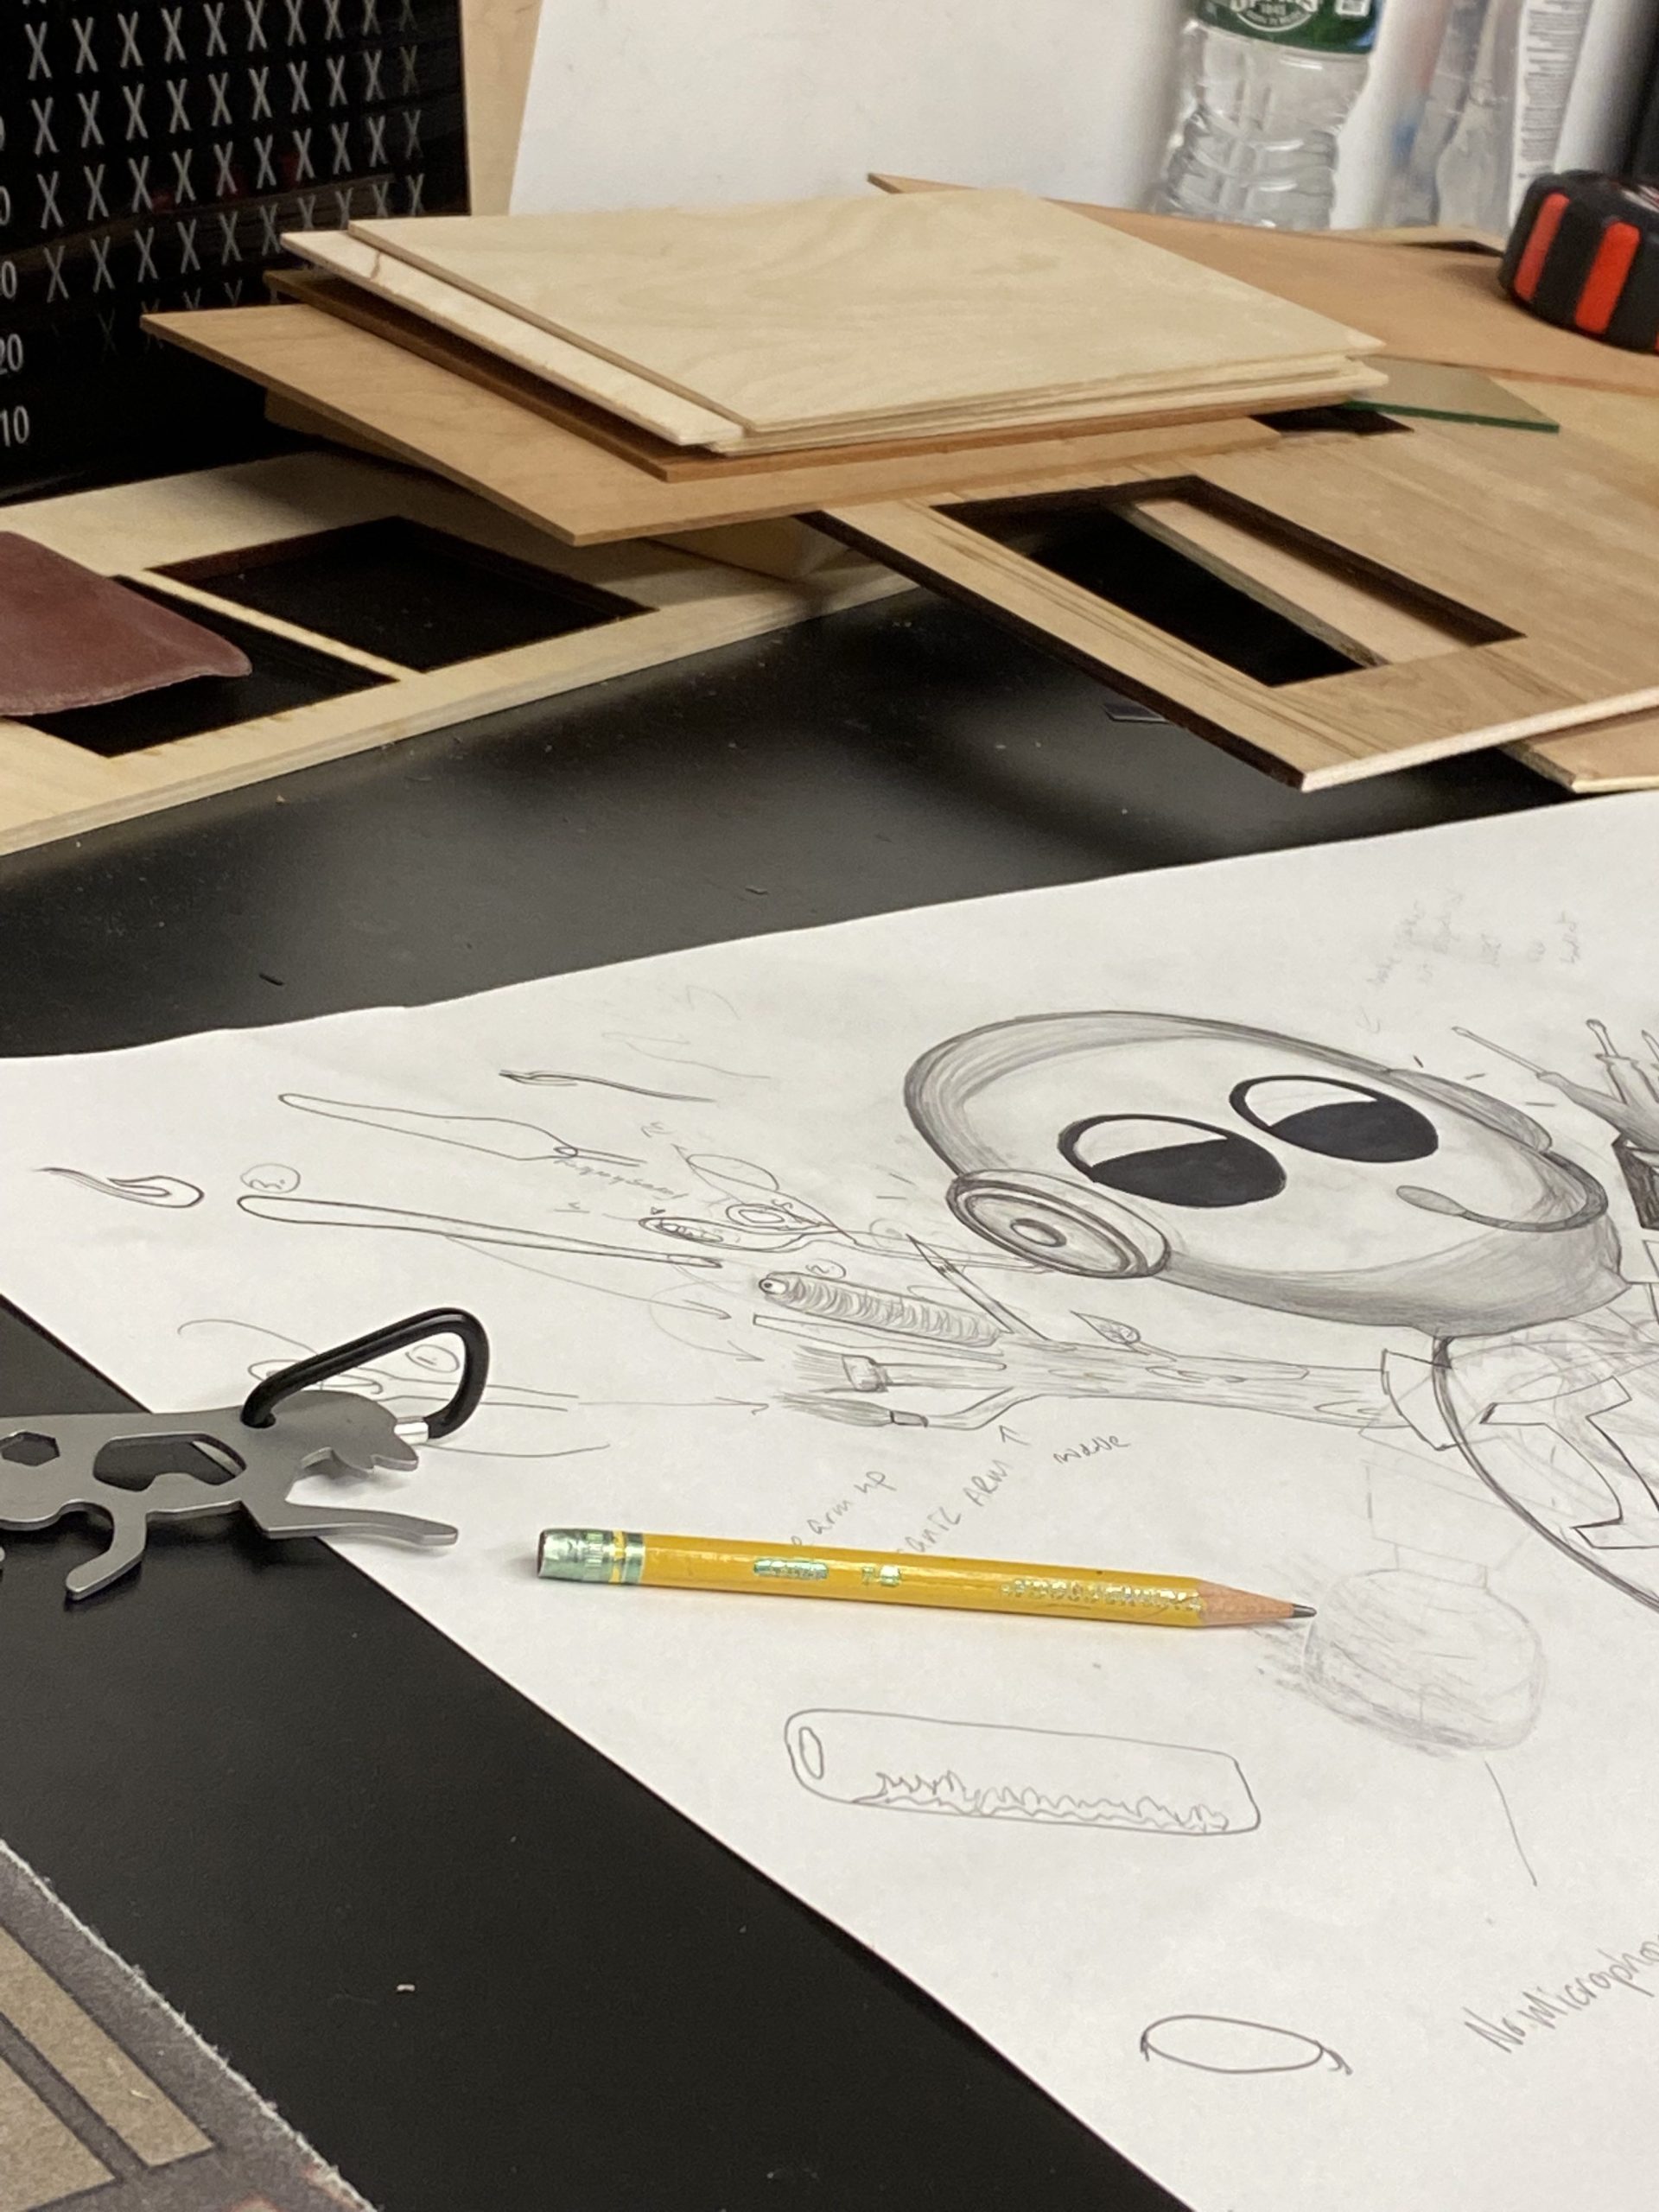 Art of MRC (pronounced Mercy) Robot drawn with pencil and paper spread out on a desk